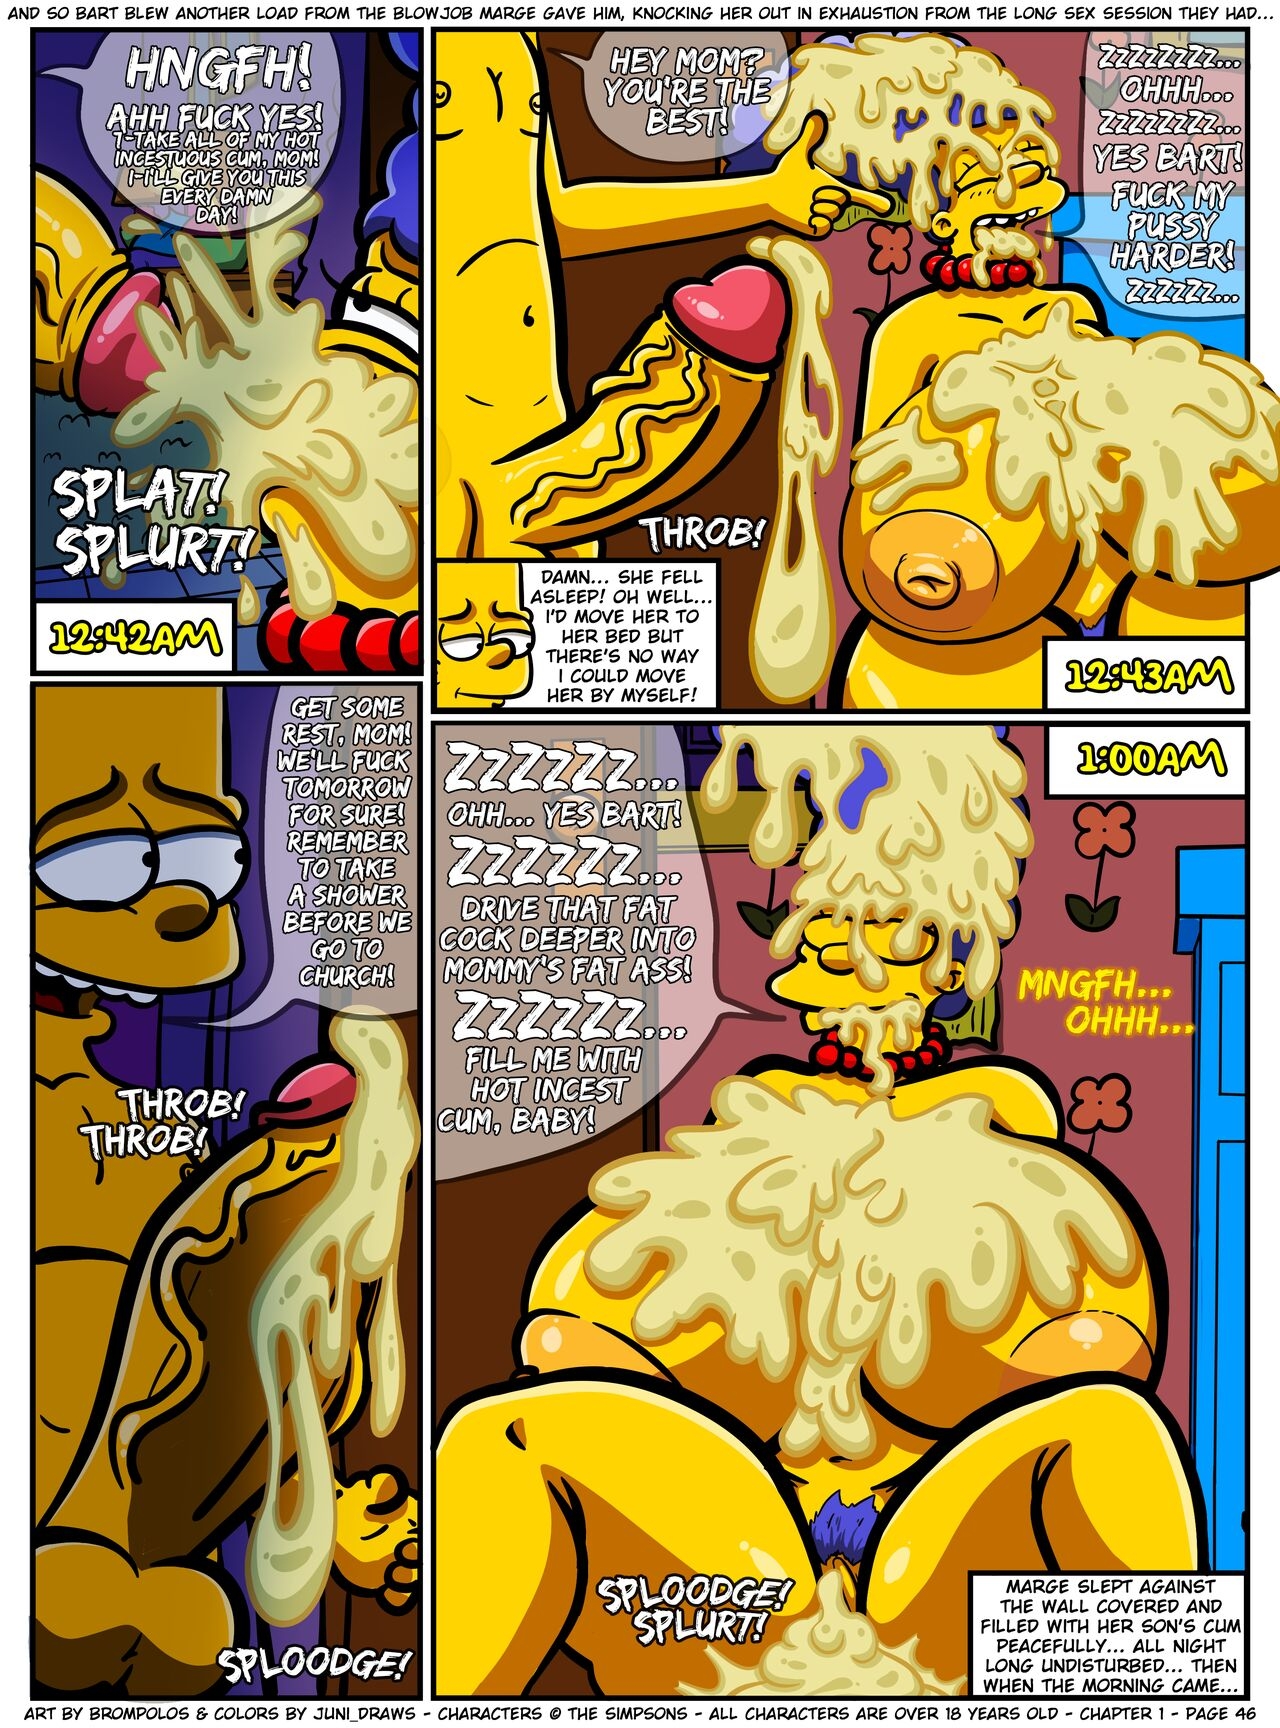 [Brompolos/Juni_Draws] The Sexensteins (Simpsons) [Ongoing] 46